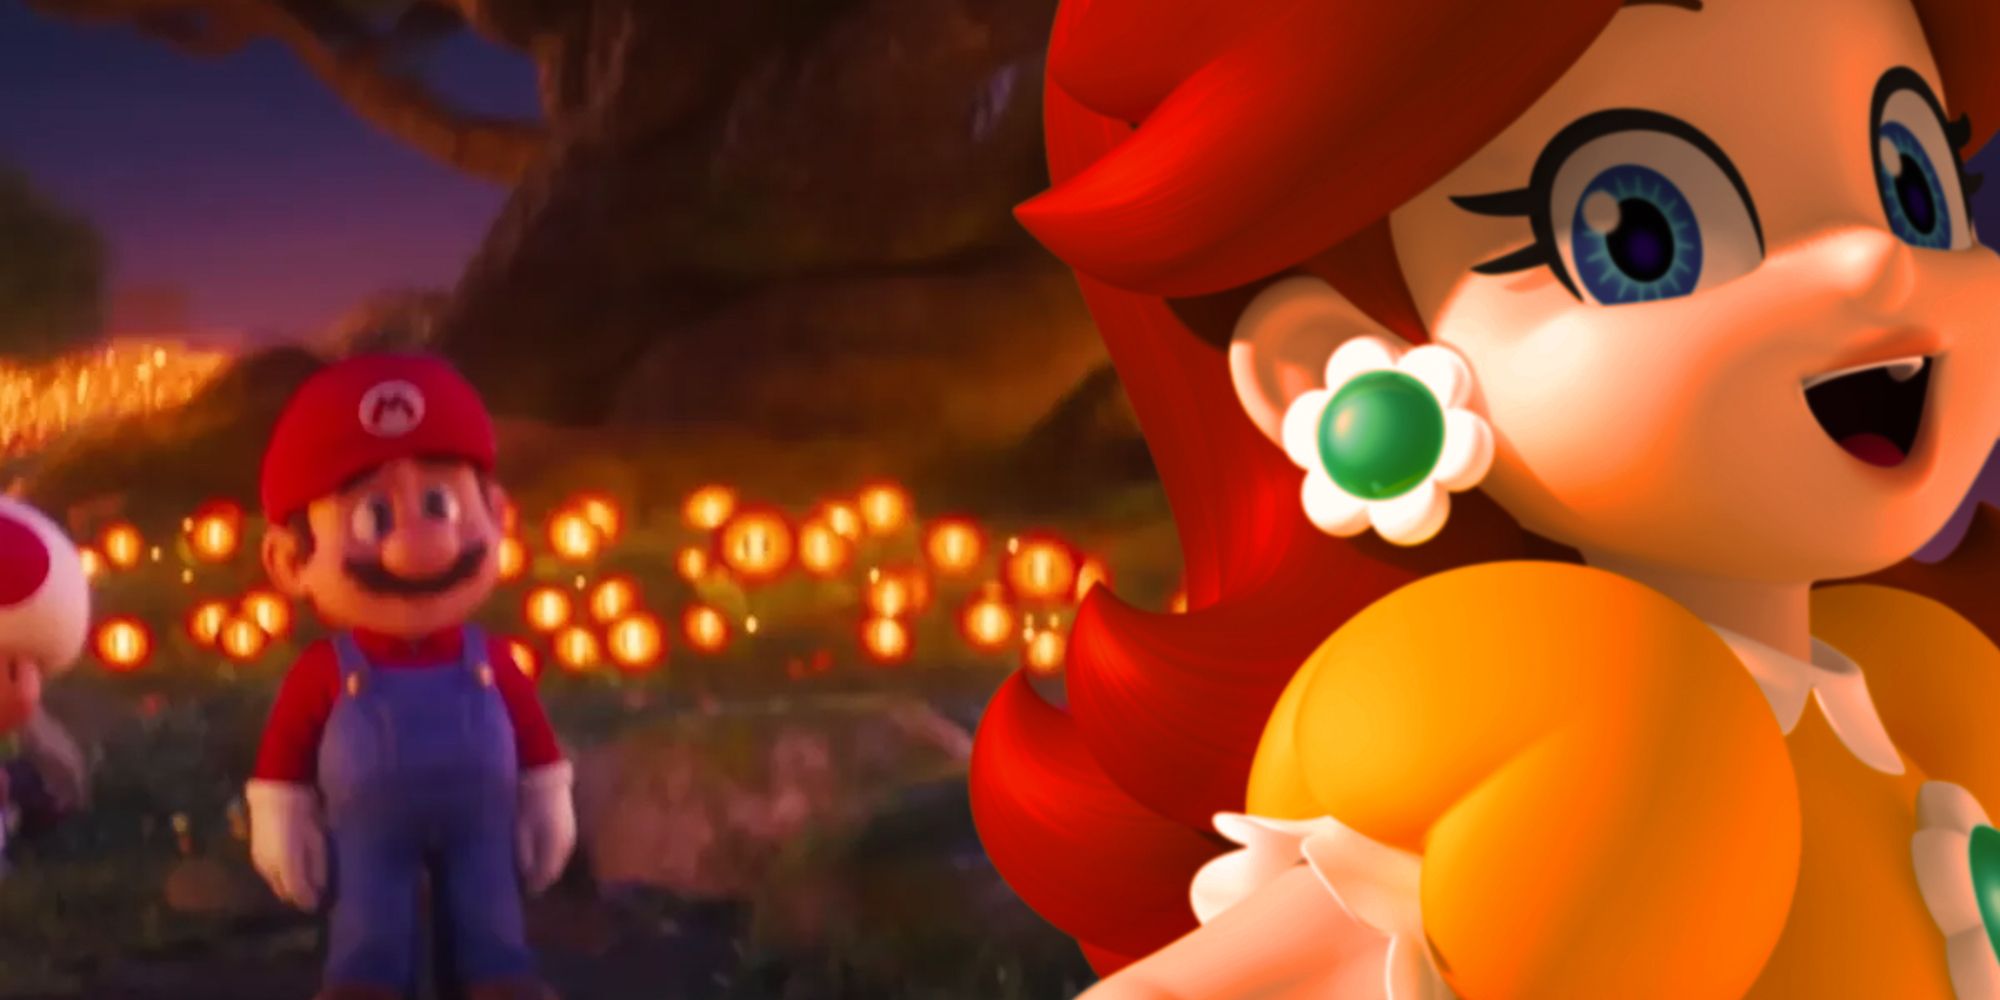 Mario movie still with Daisy in place of Peach